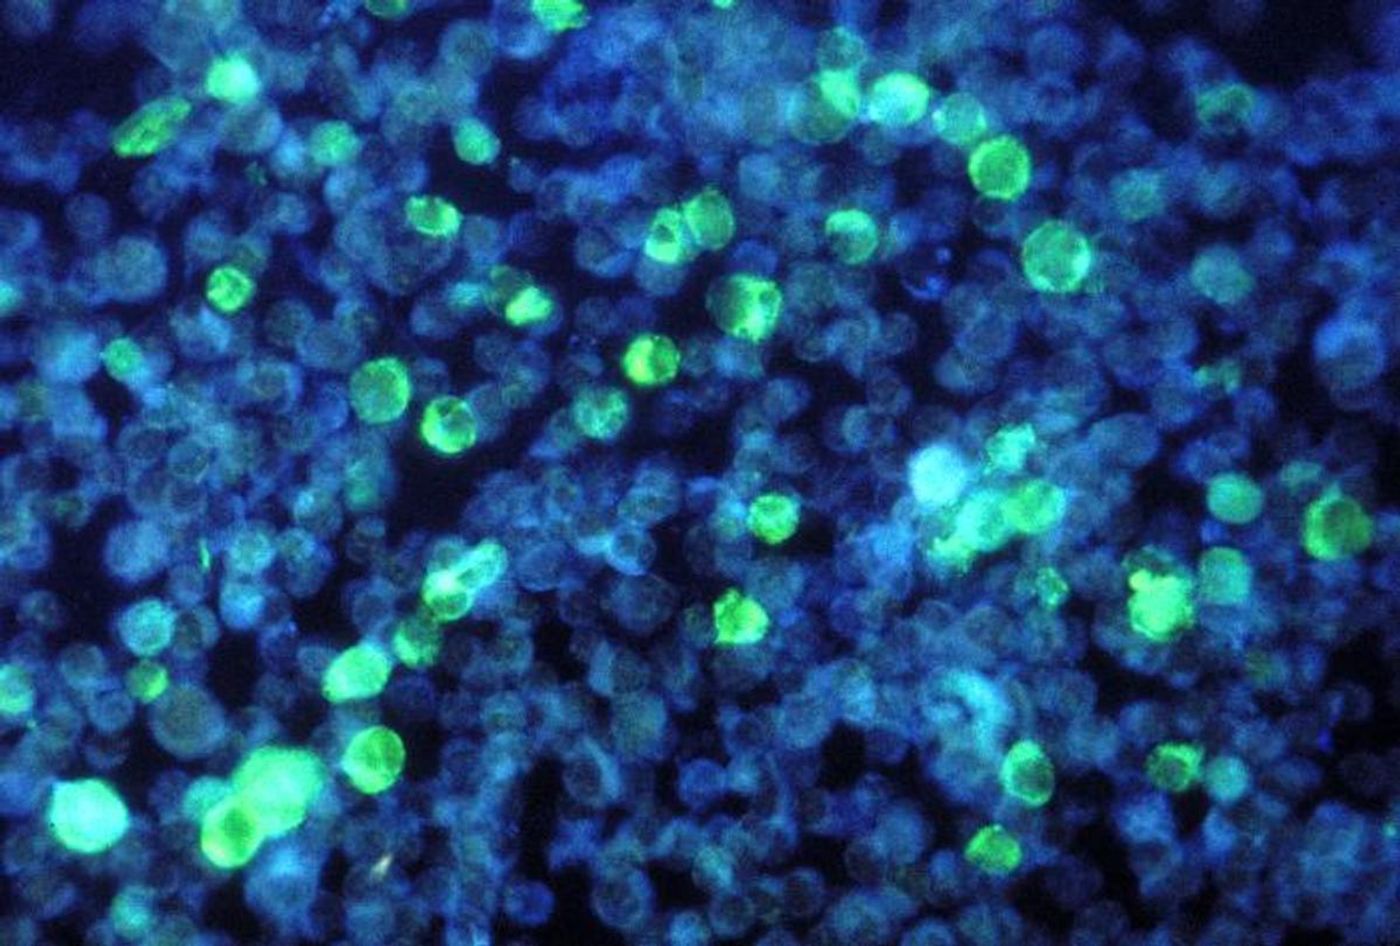 A photomicrograph of leukemia cells containing Epstein-Barr virus (EBV). Infected cells are glow green under ultraviolet light. / Credit: CDC/ Dr. Paul M. Feorino